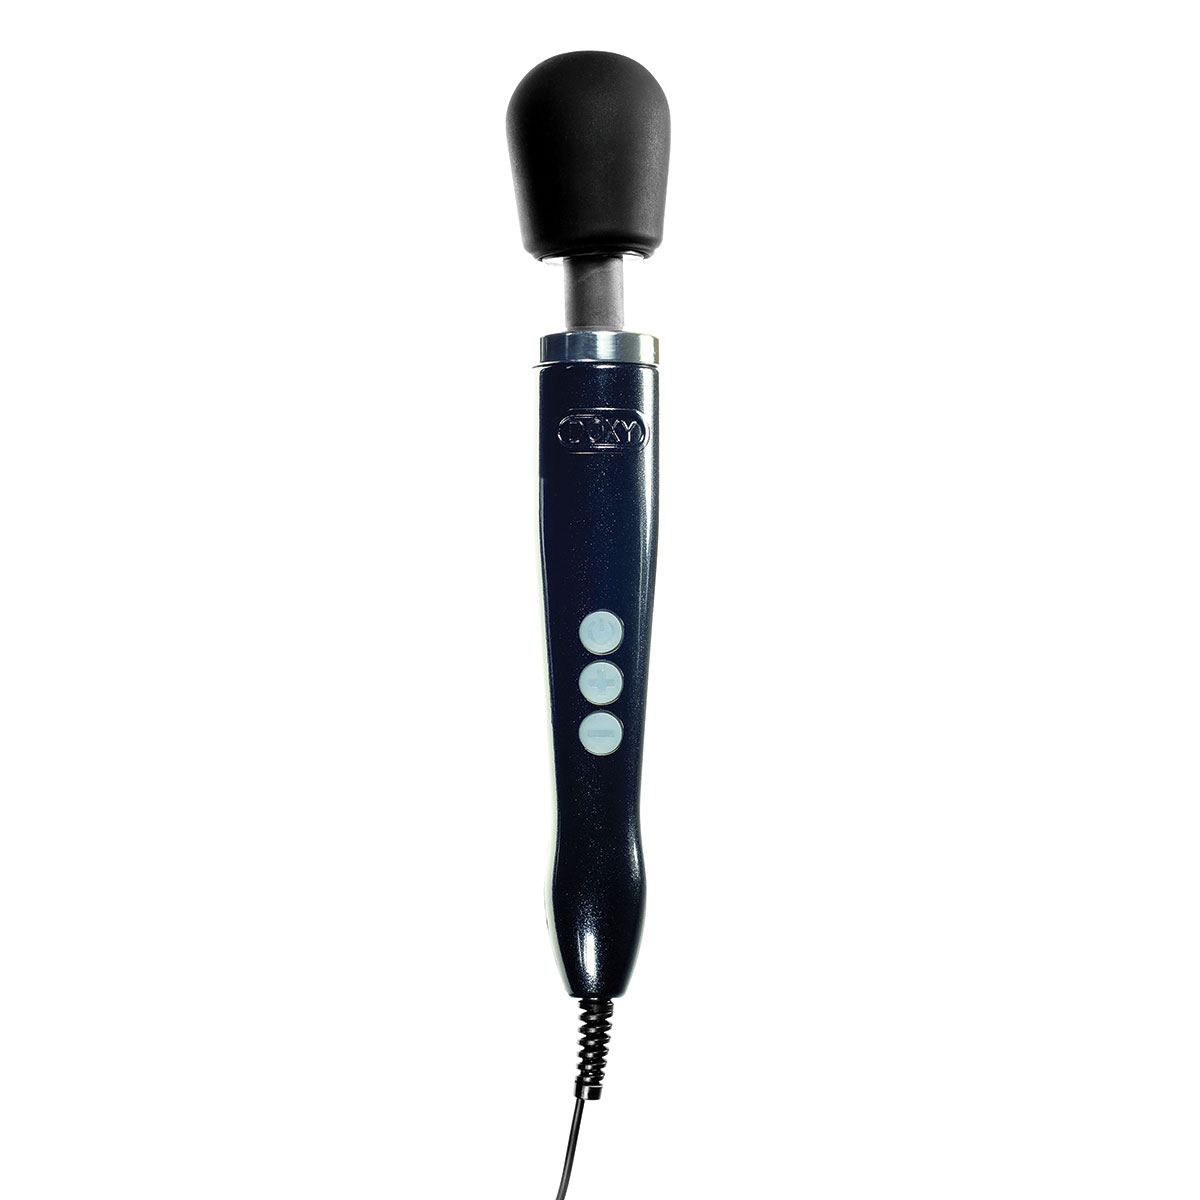 Doxy Die Cast Wand Vibrator Black - image 1 of 2